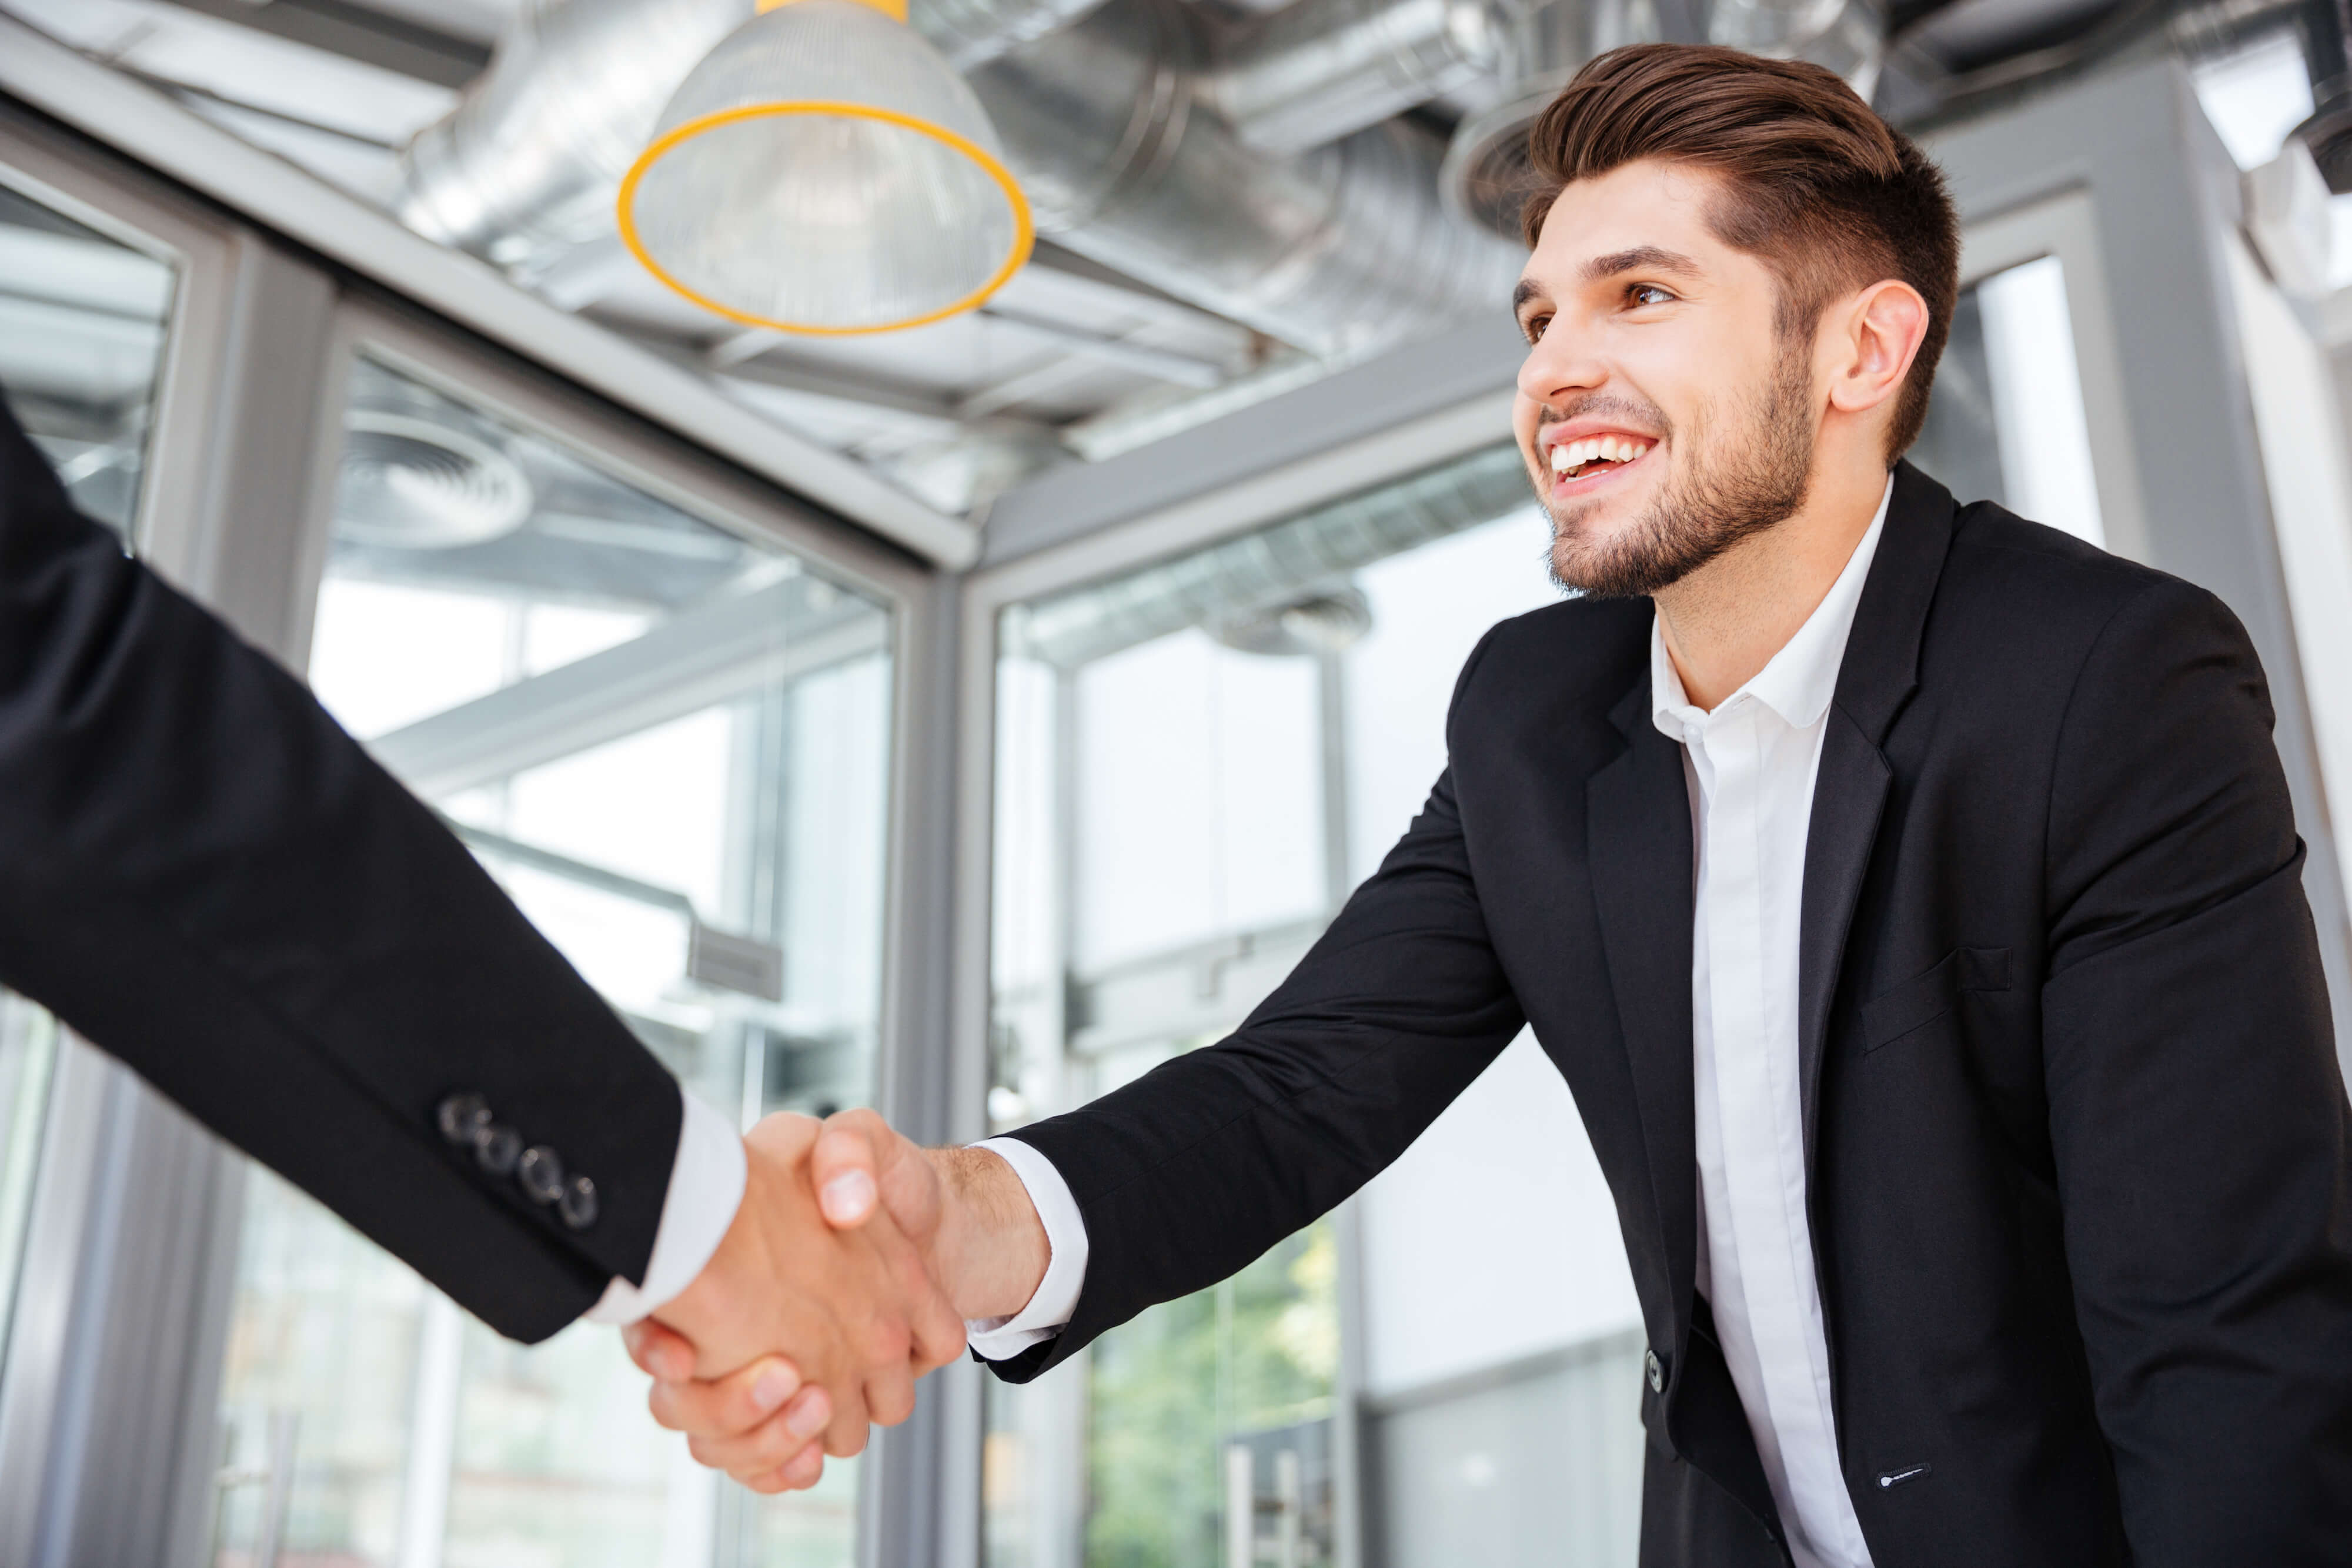 Two smiling successful young businessmen shaking hands on business meeting in office